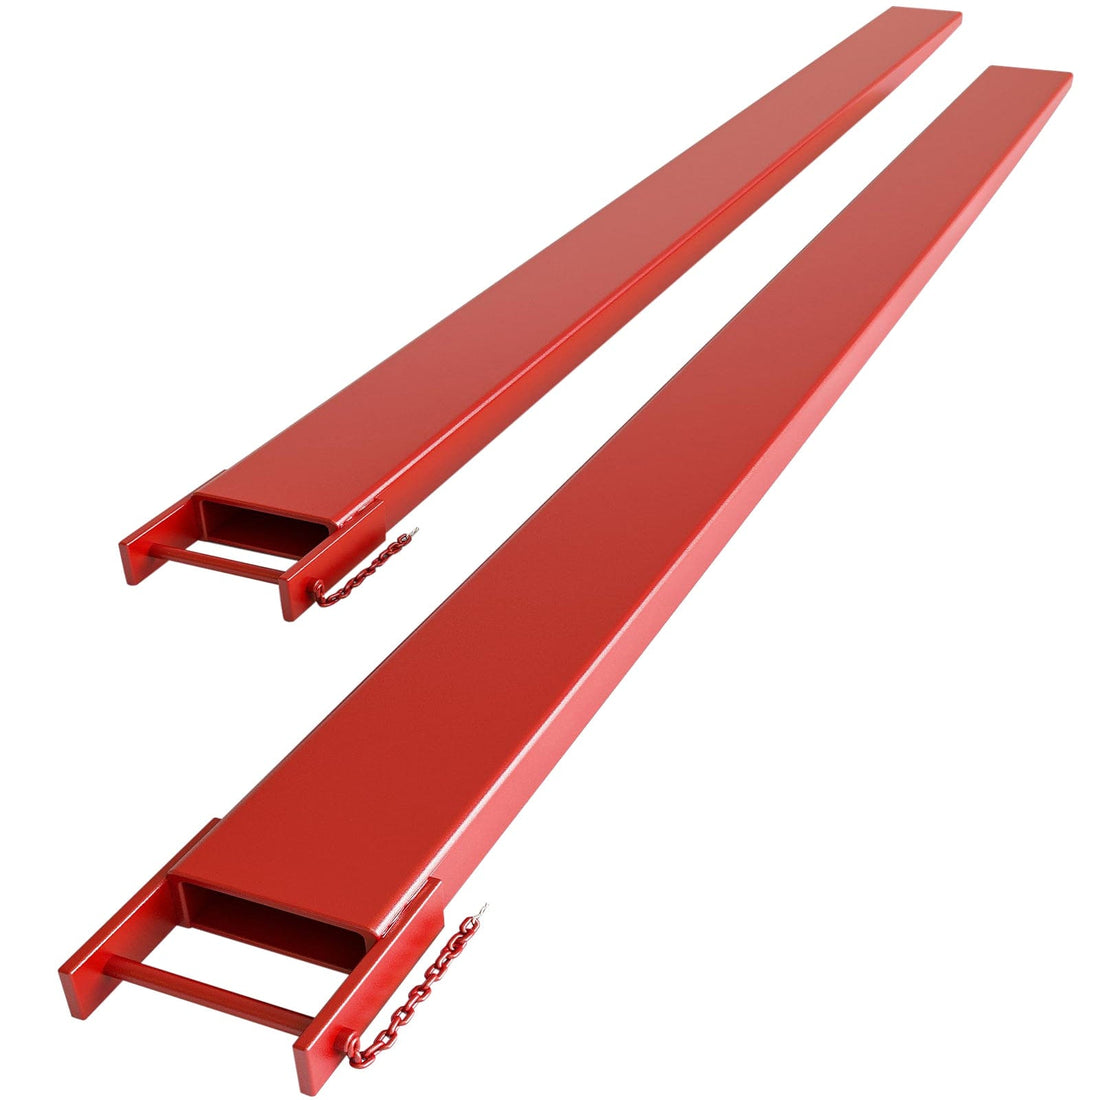 Pallet Fork Extension L72xW4.5 Inch Heavy Duty Steel Pallet Extensions for Forklift Red